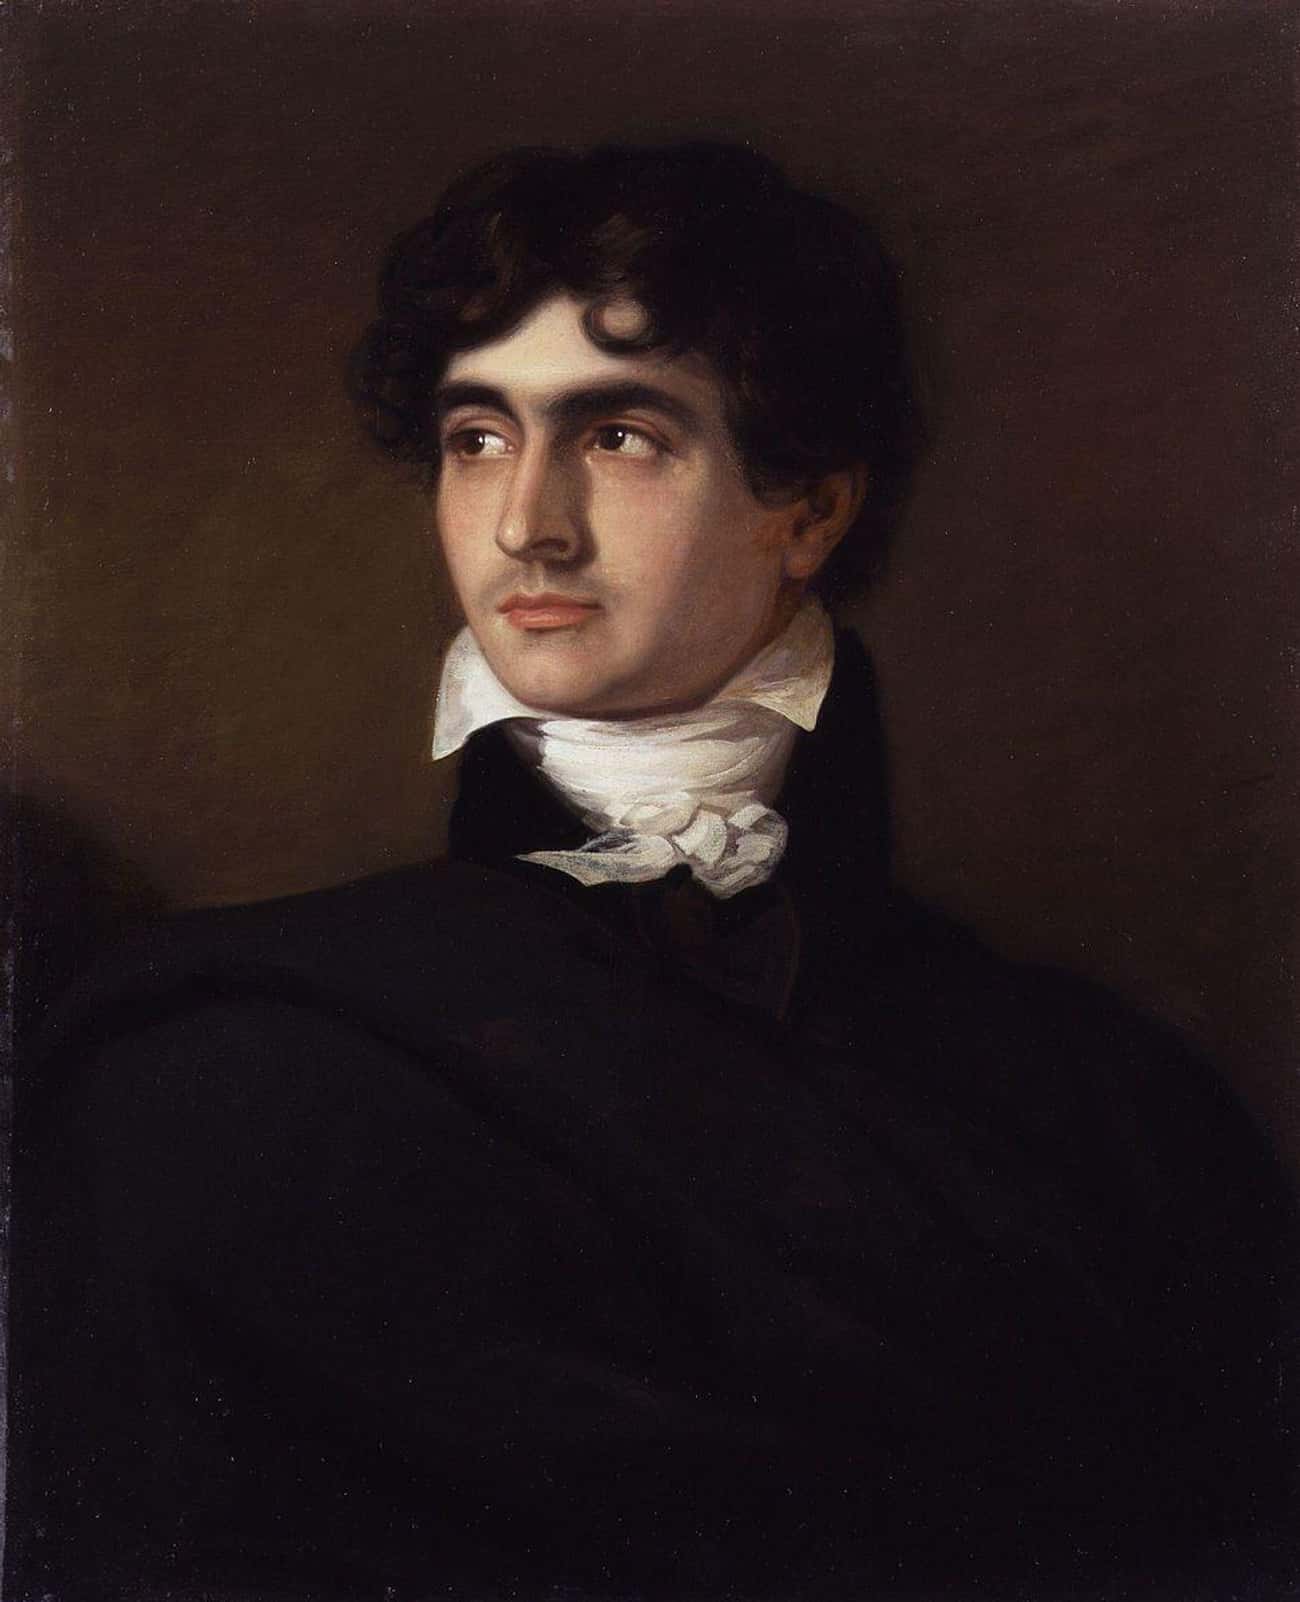 John Polidori Created The First Aristocratic Vampire In His Story &#39;The Vampyre&#39;